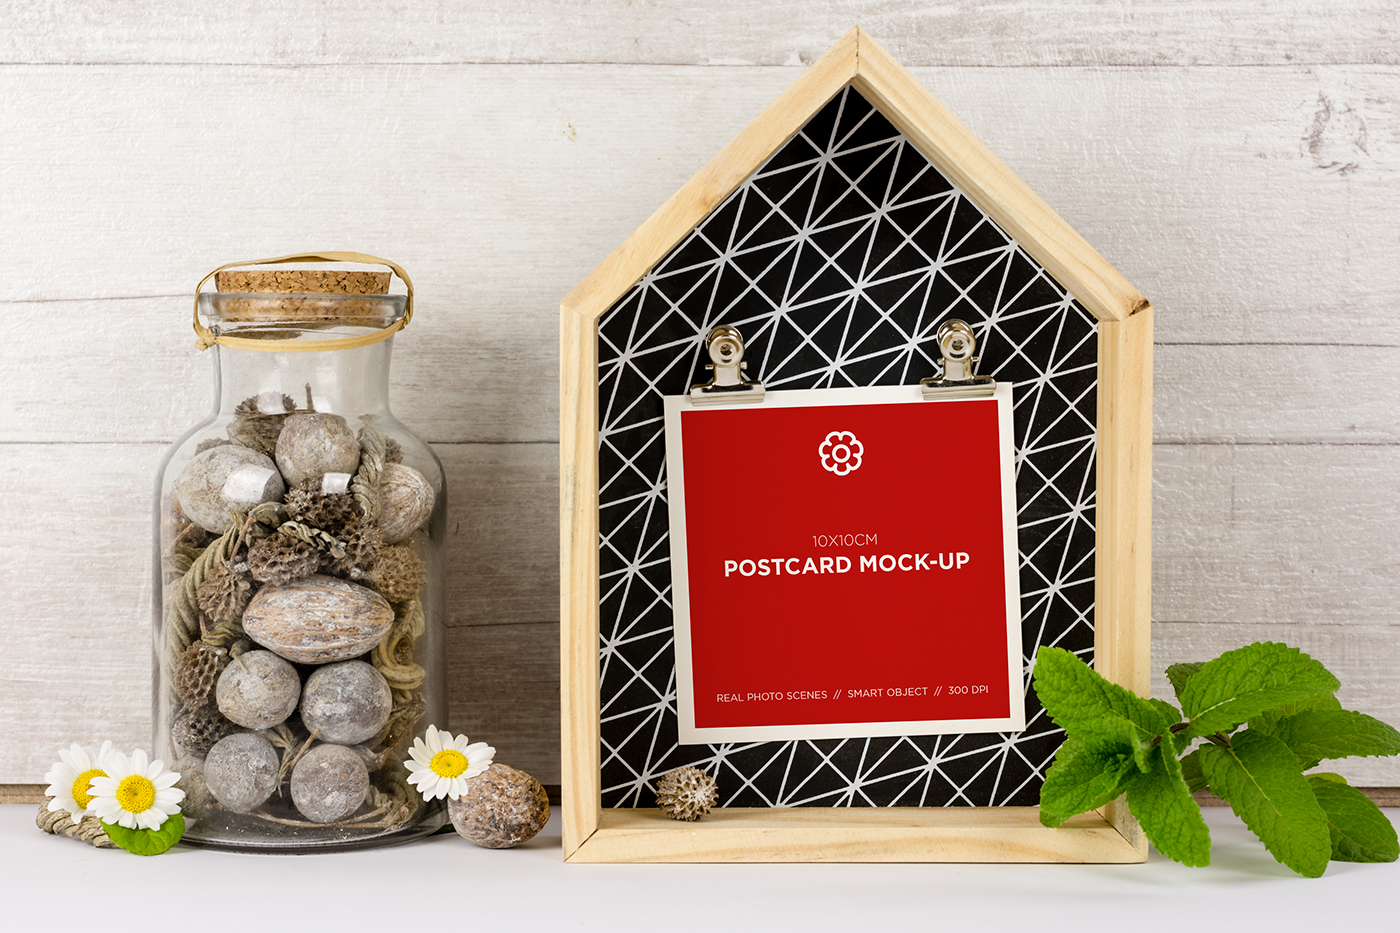 postcard mockup product mokcup styled scenes custom scene wooden house message Flowers mint natural green